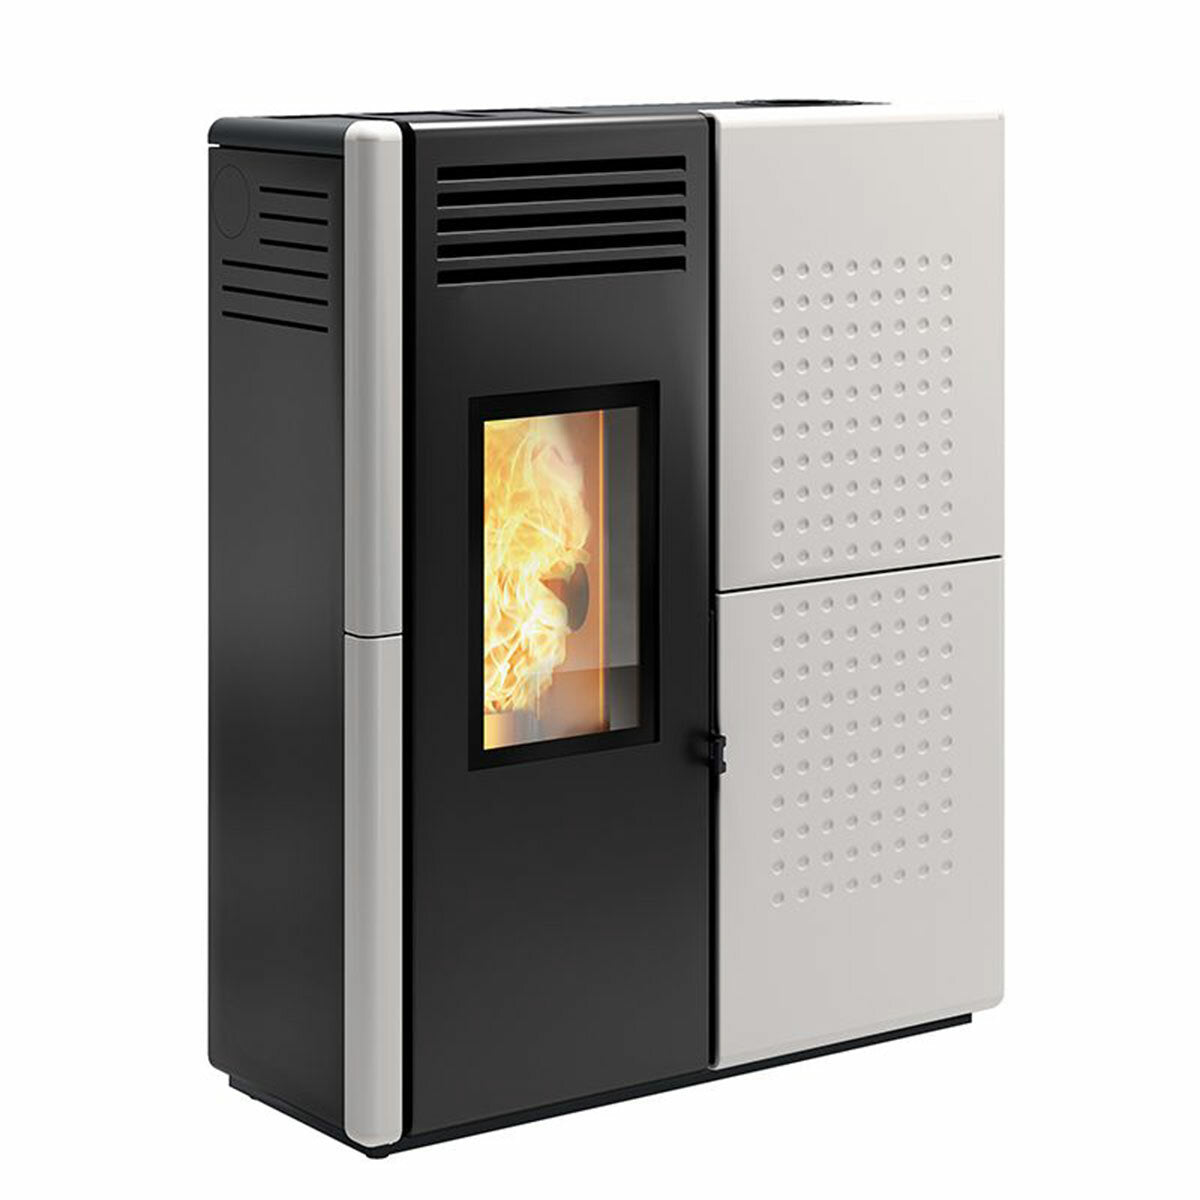 Caminetti Montegrappa Fendor SXS12 pellet stove 13.4 kW with ducted air White